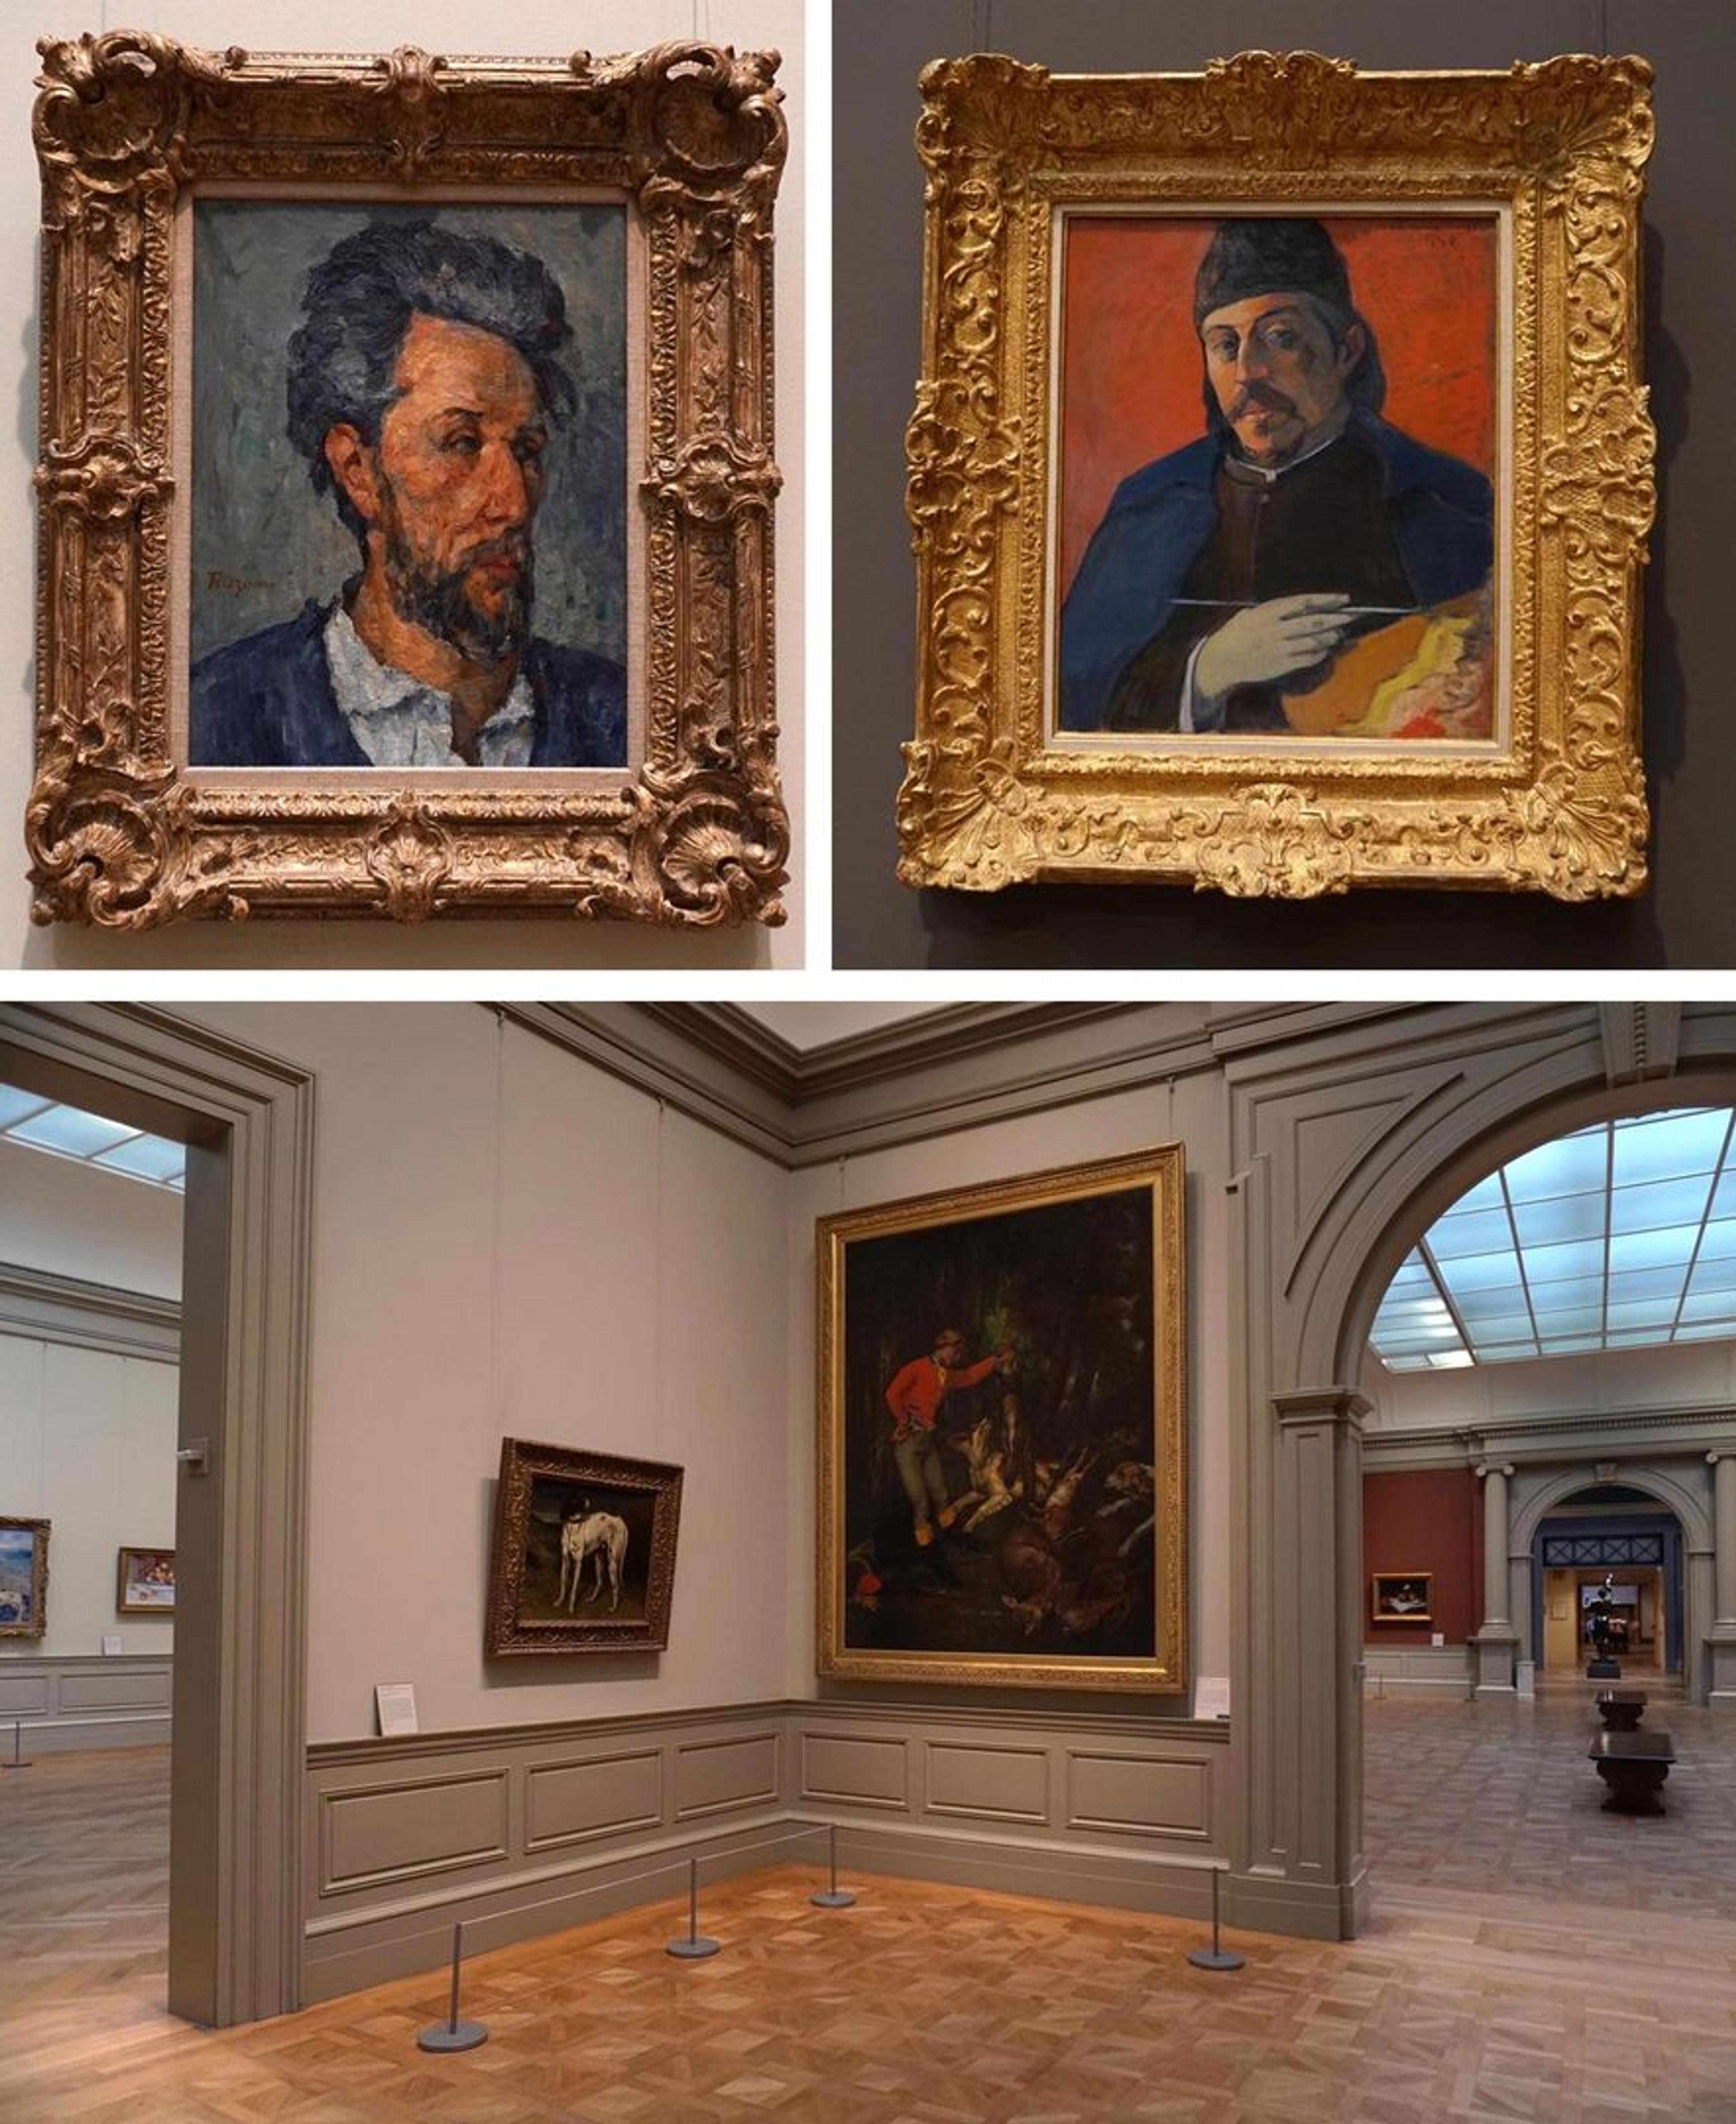 Installation views of a Gauguin self-portrait, a Cezanne portrait of a friend, and two Courbet paintings depicting dogs and hunting scenes